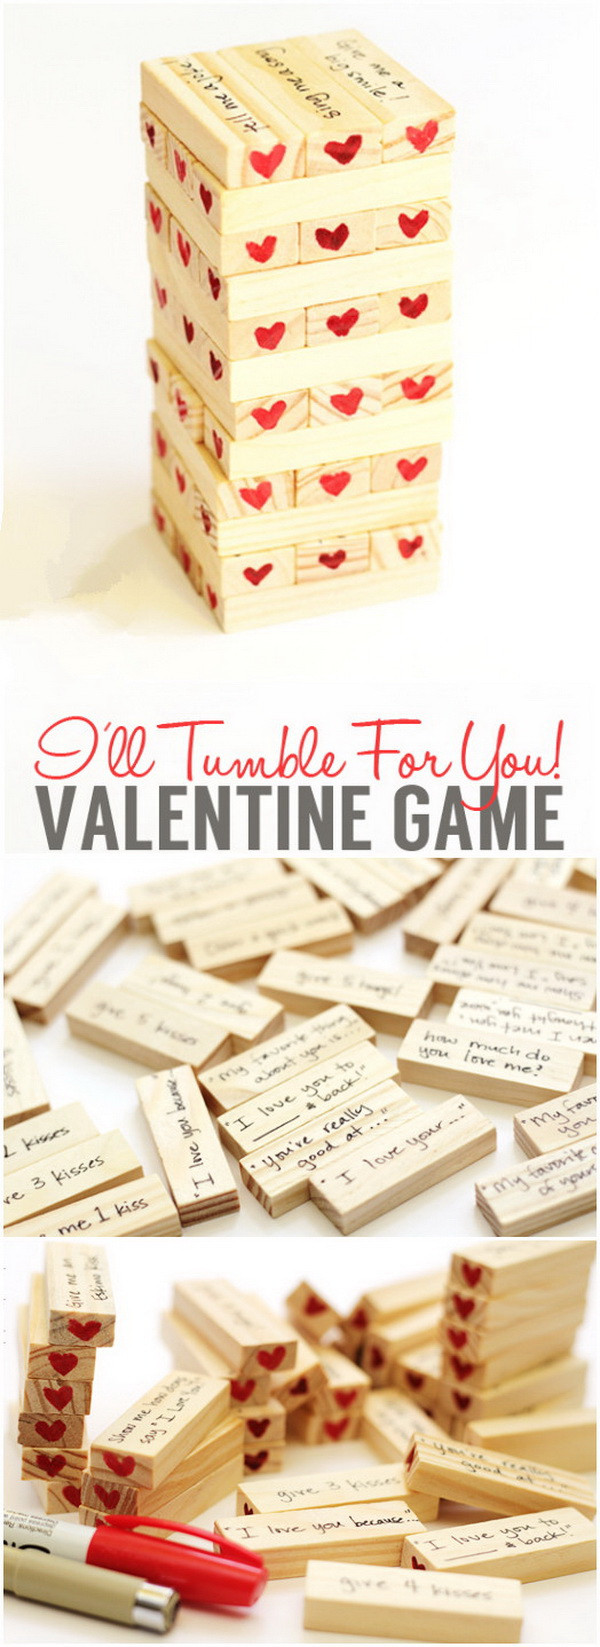 Diy Valentine Gift Ideas For Him
 Easy DIY Valentine s Day Gifts for Boyfriend Listing More